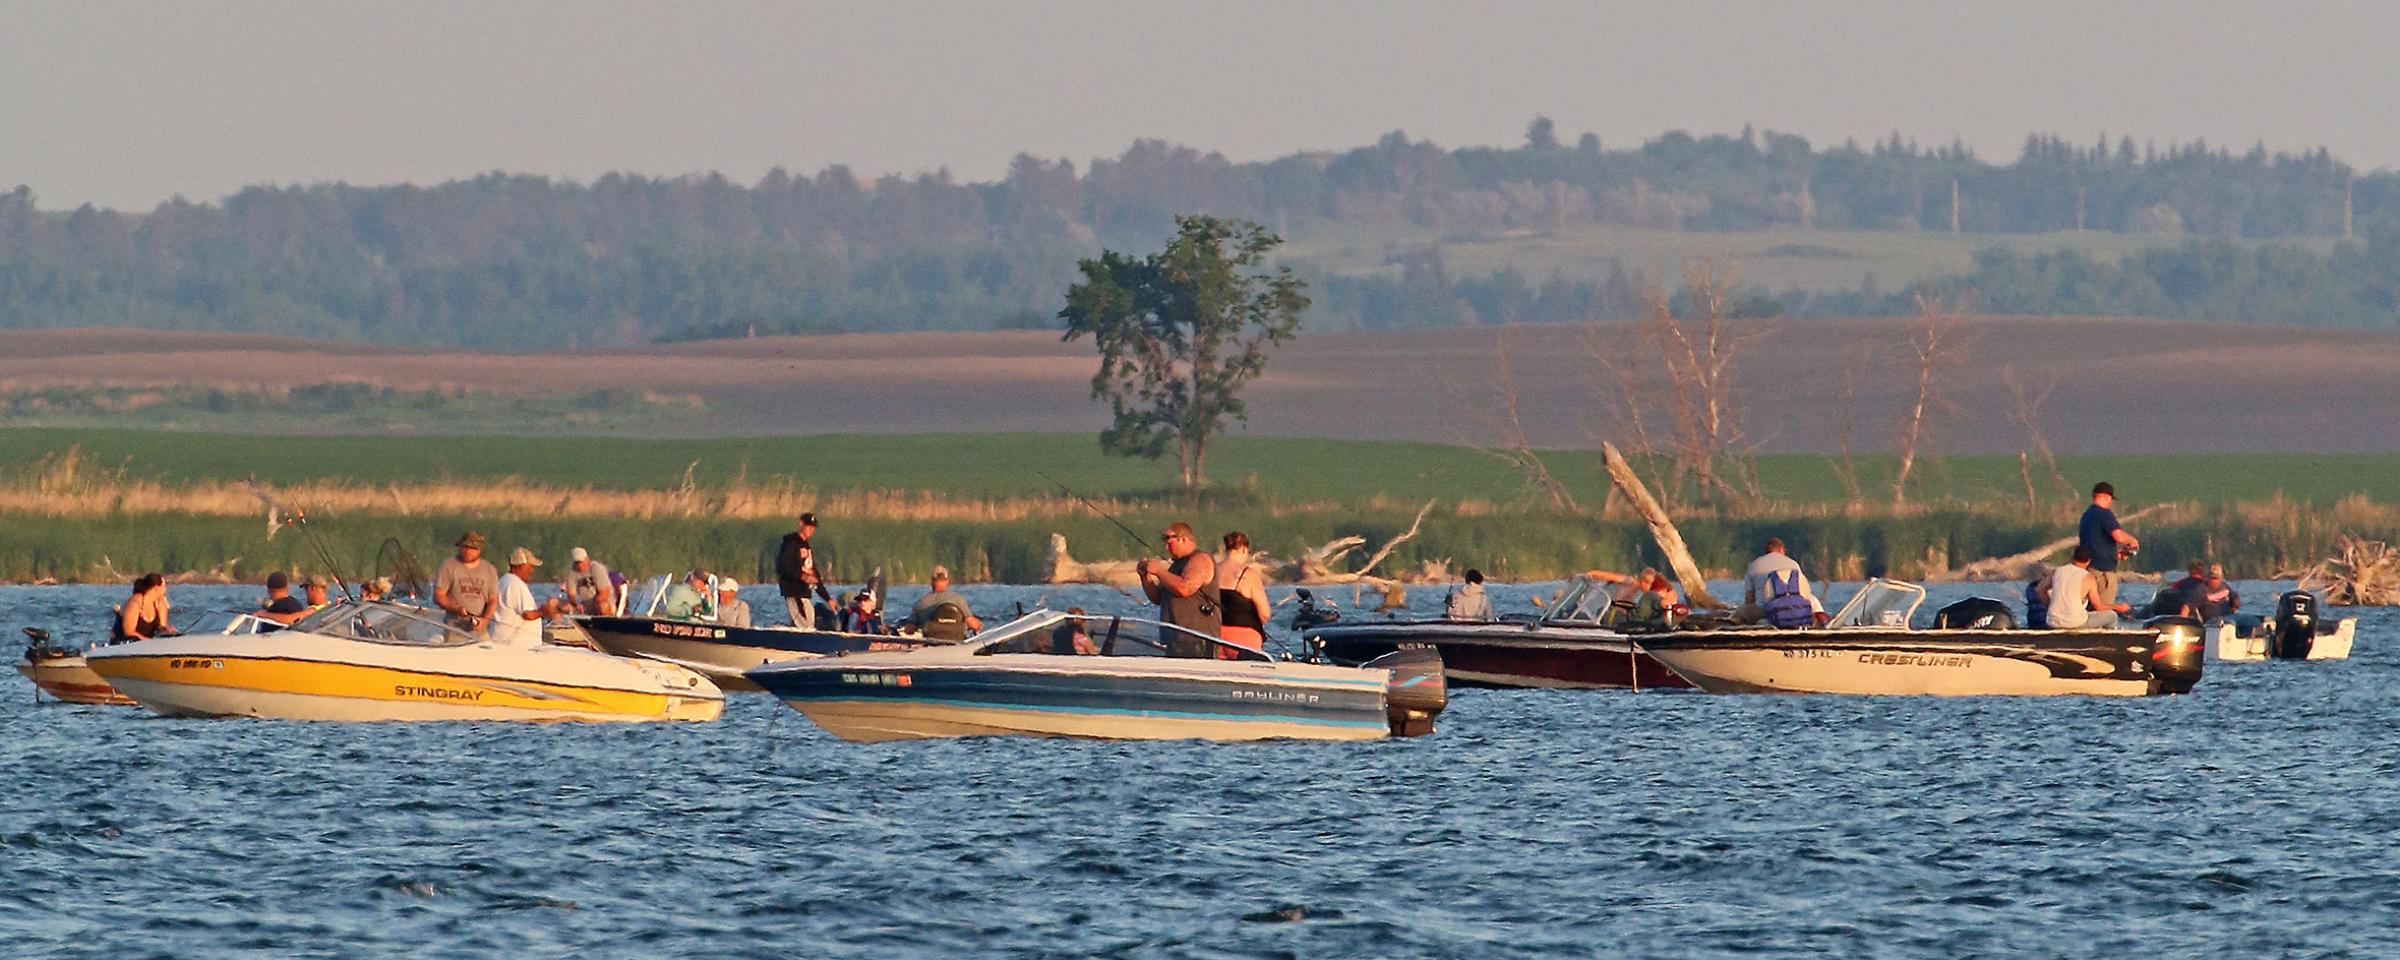 Boats on lake with people fishing